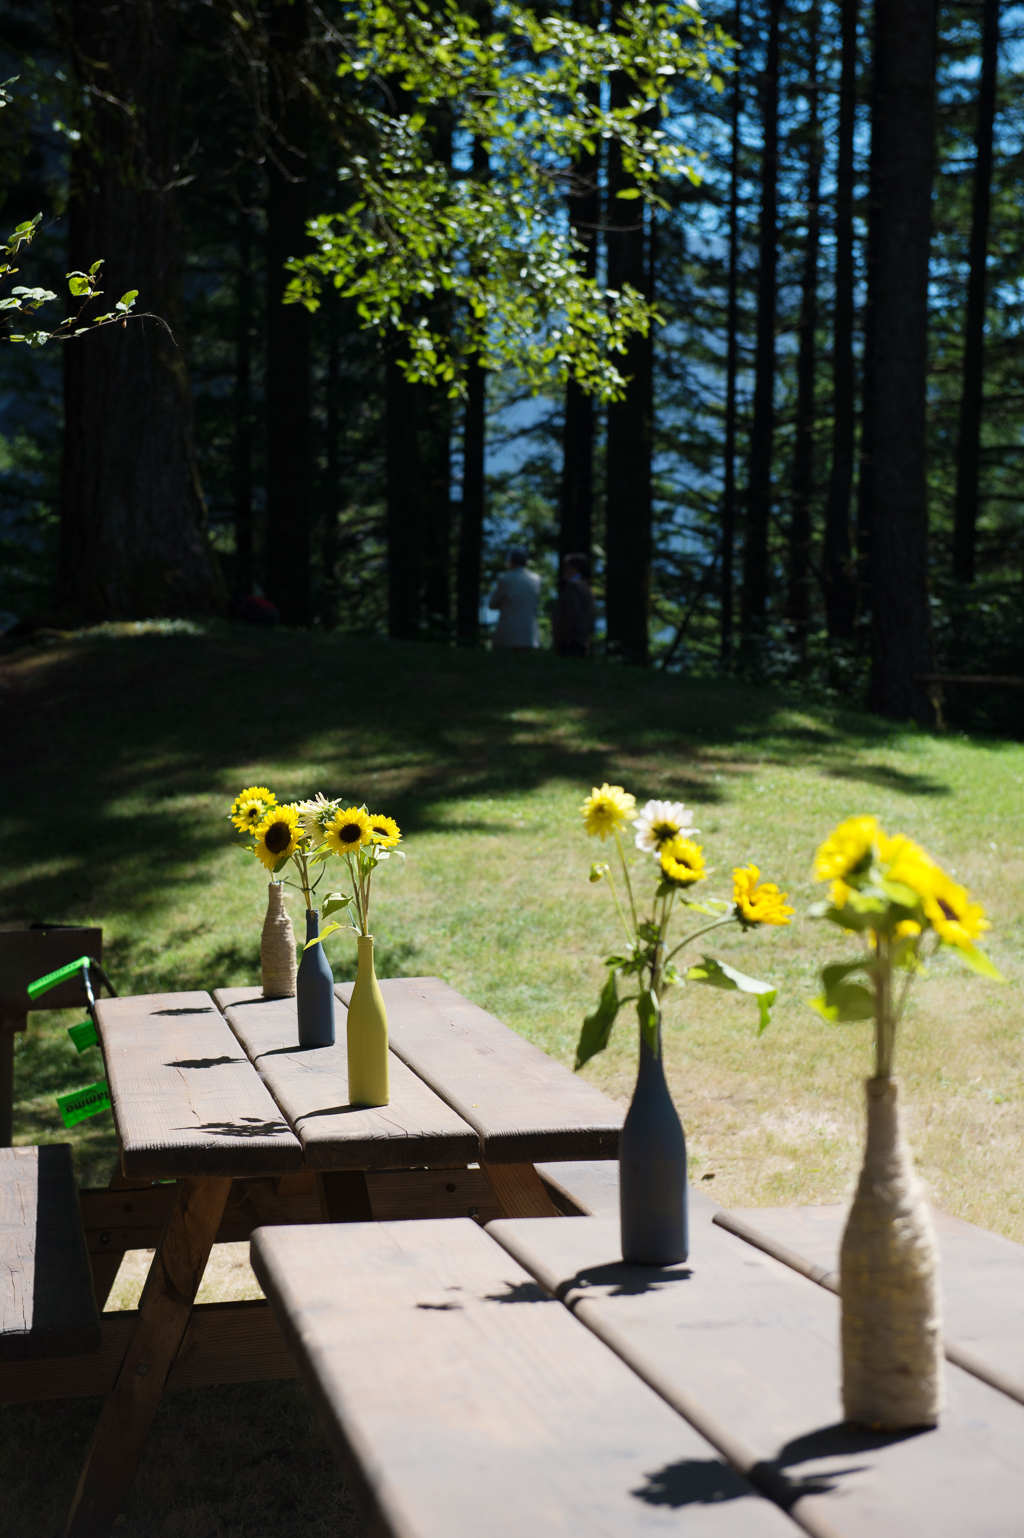 sunflowers in painted wine bottles line picnic tables